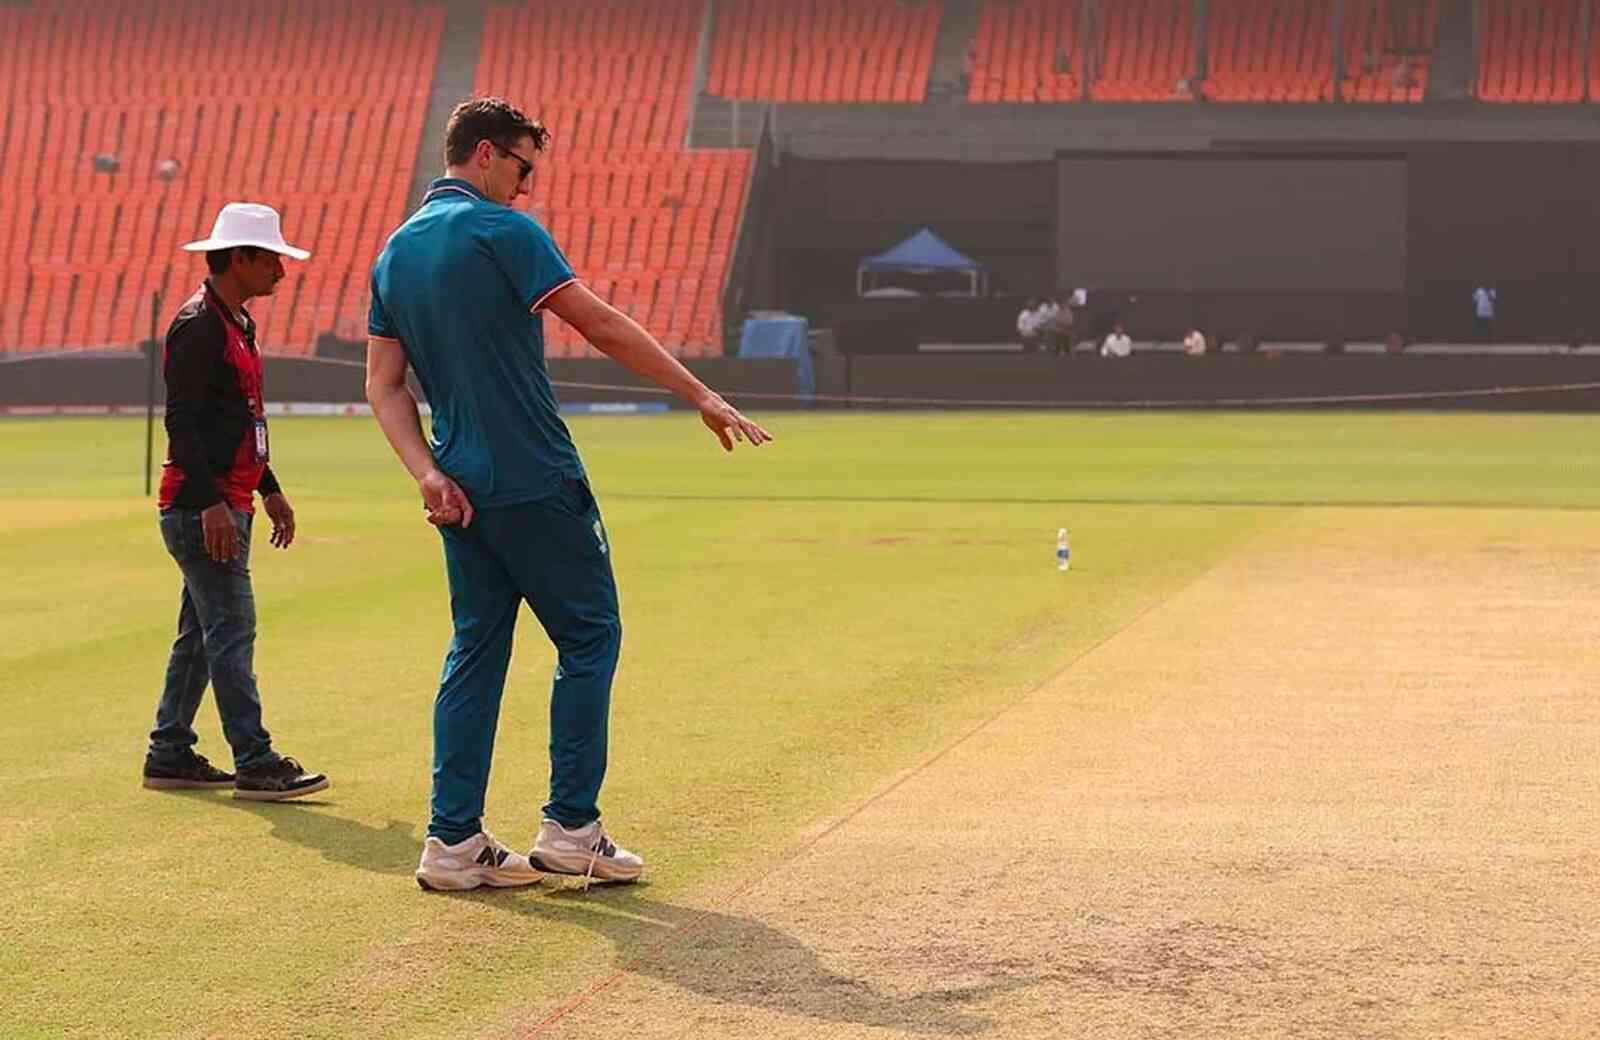 ICC To Monitor Preparations Ahead of WC Final Amidst Pitch-Swapping Allegations